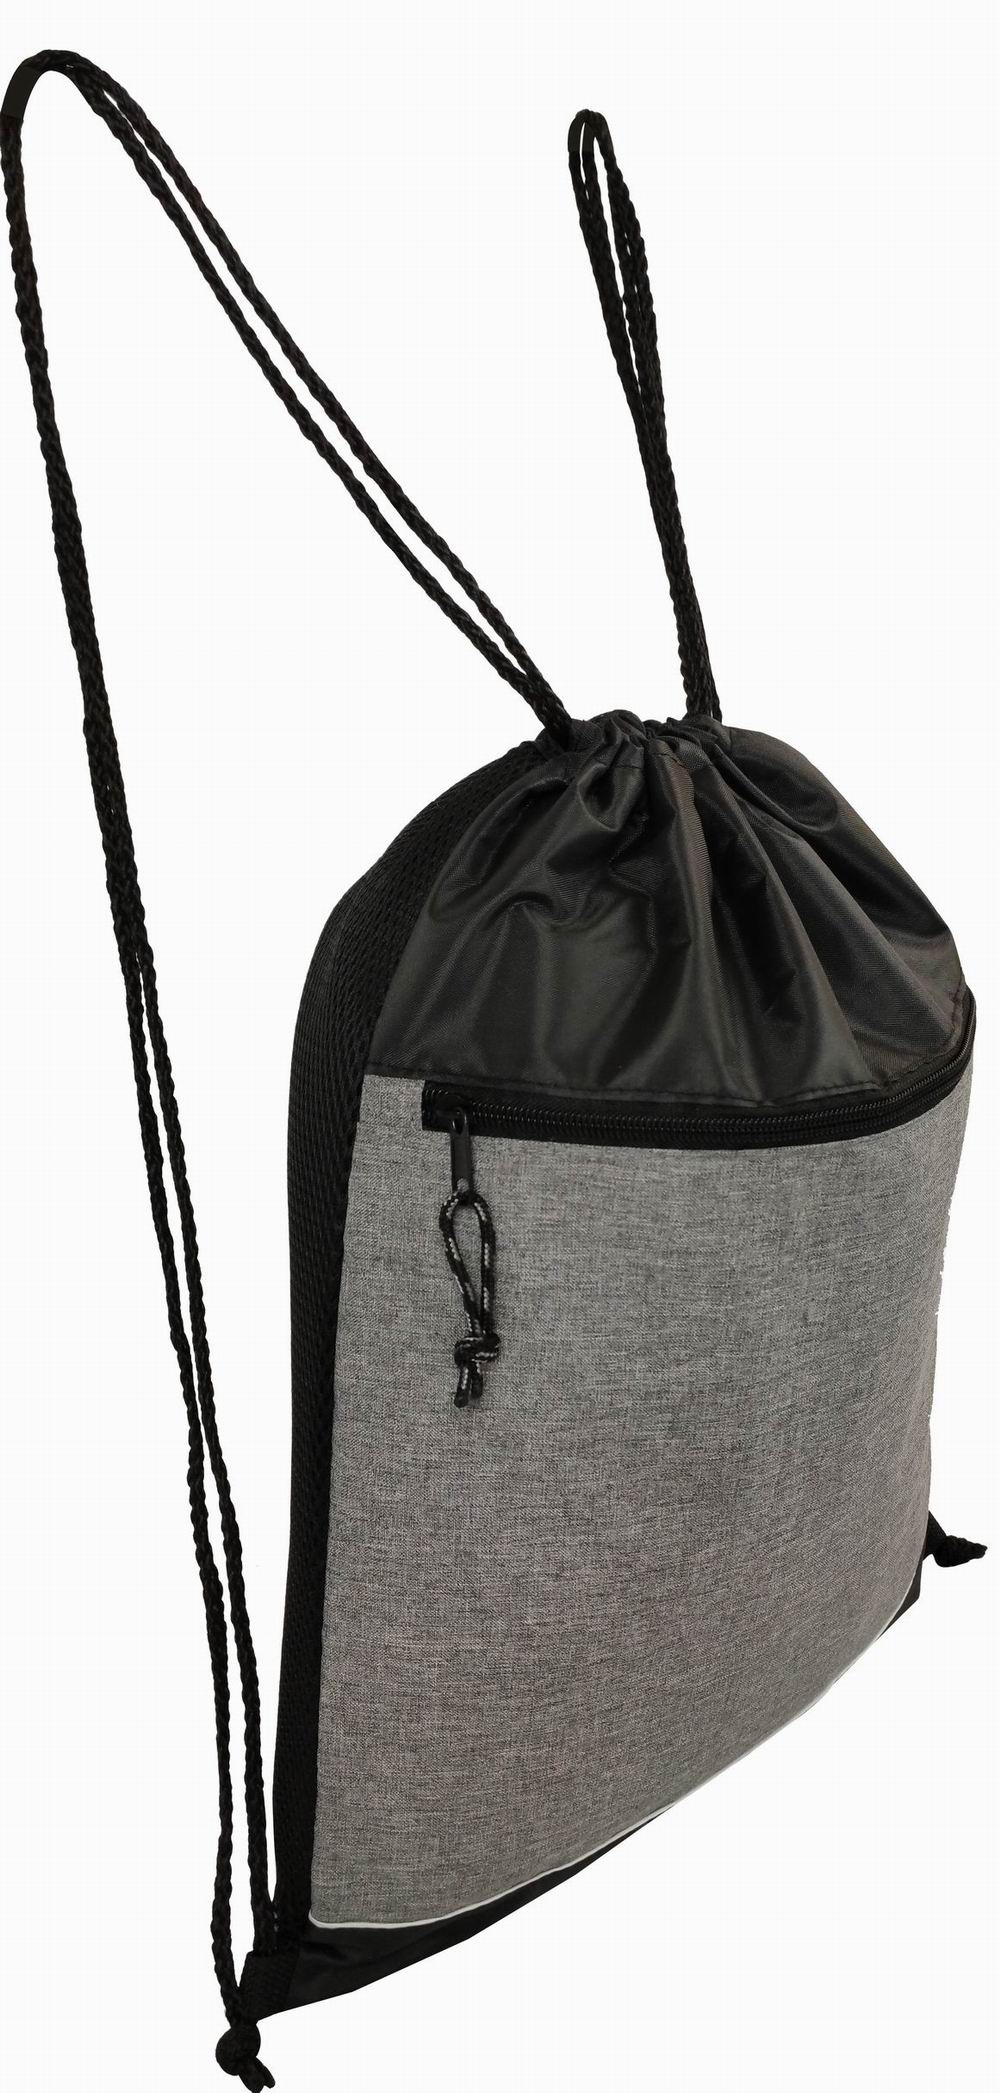 Promotional drawstring bags with mesh